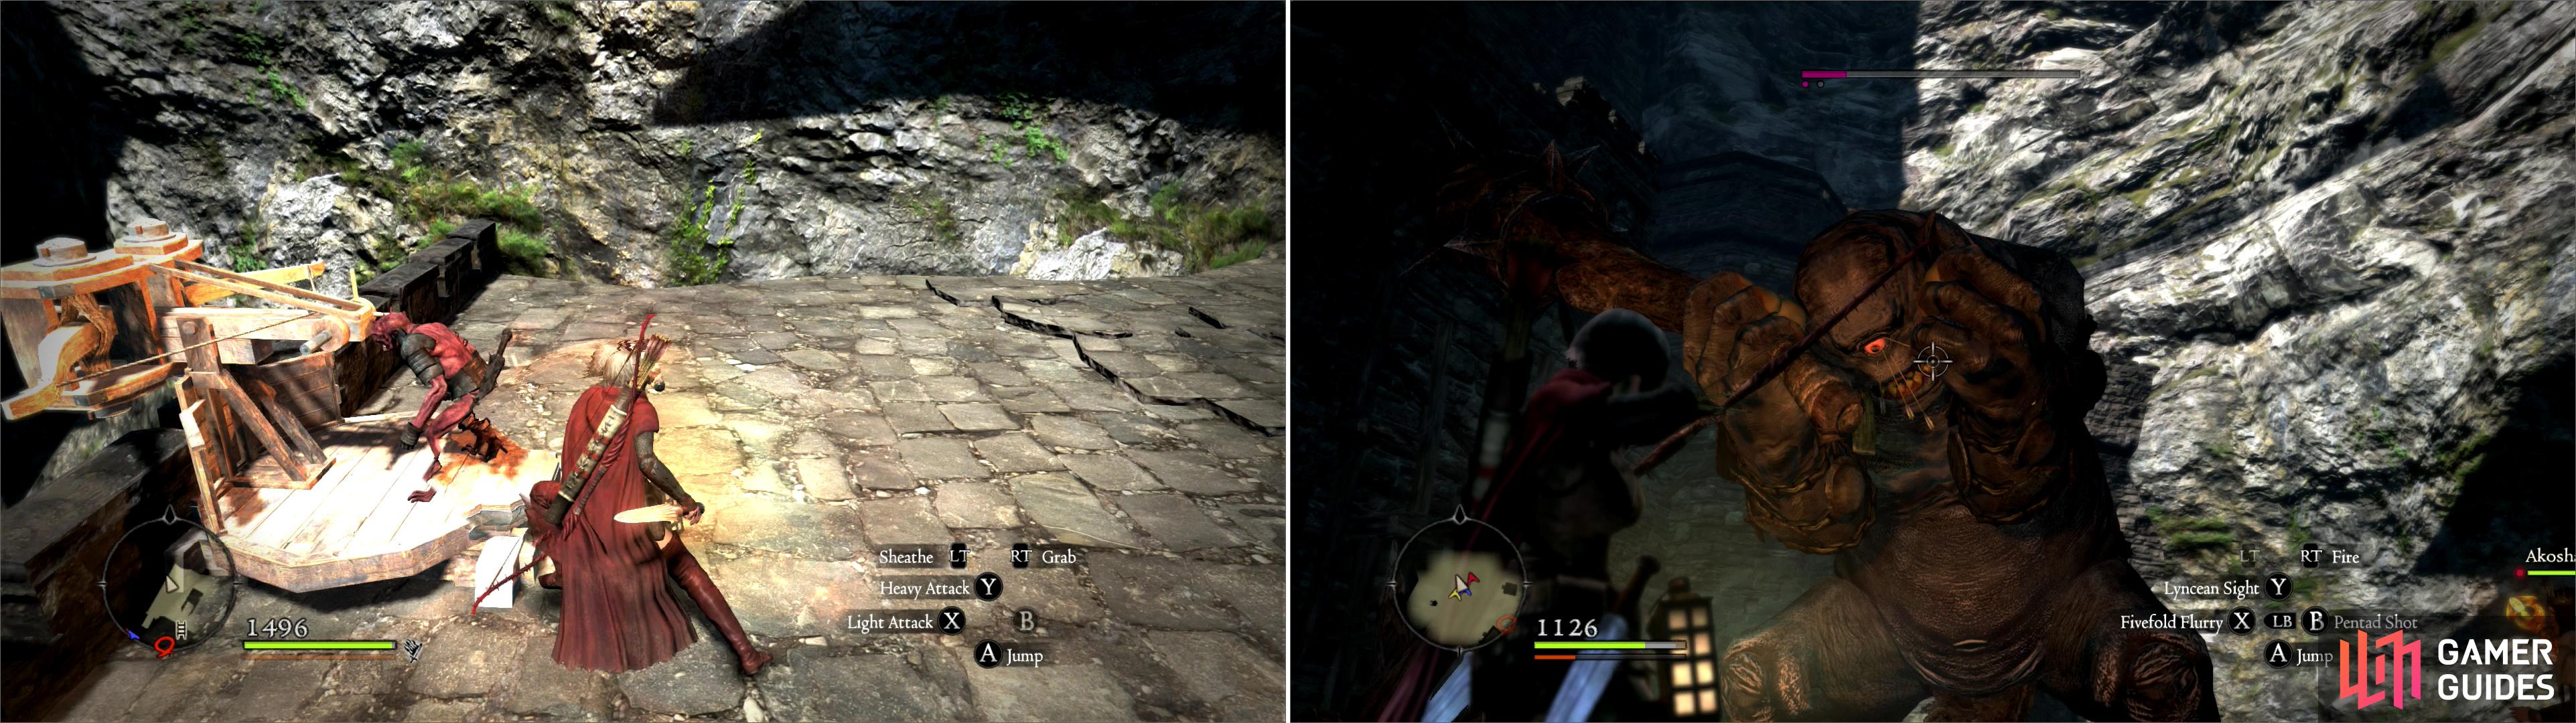 Leap a gap and kill more Goblins, particularly the one manning a ballista (left) then descend into the courtyard and battle a pair of Cyclops (right).